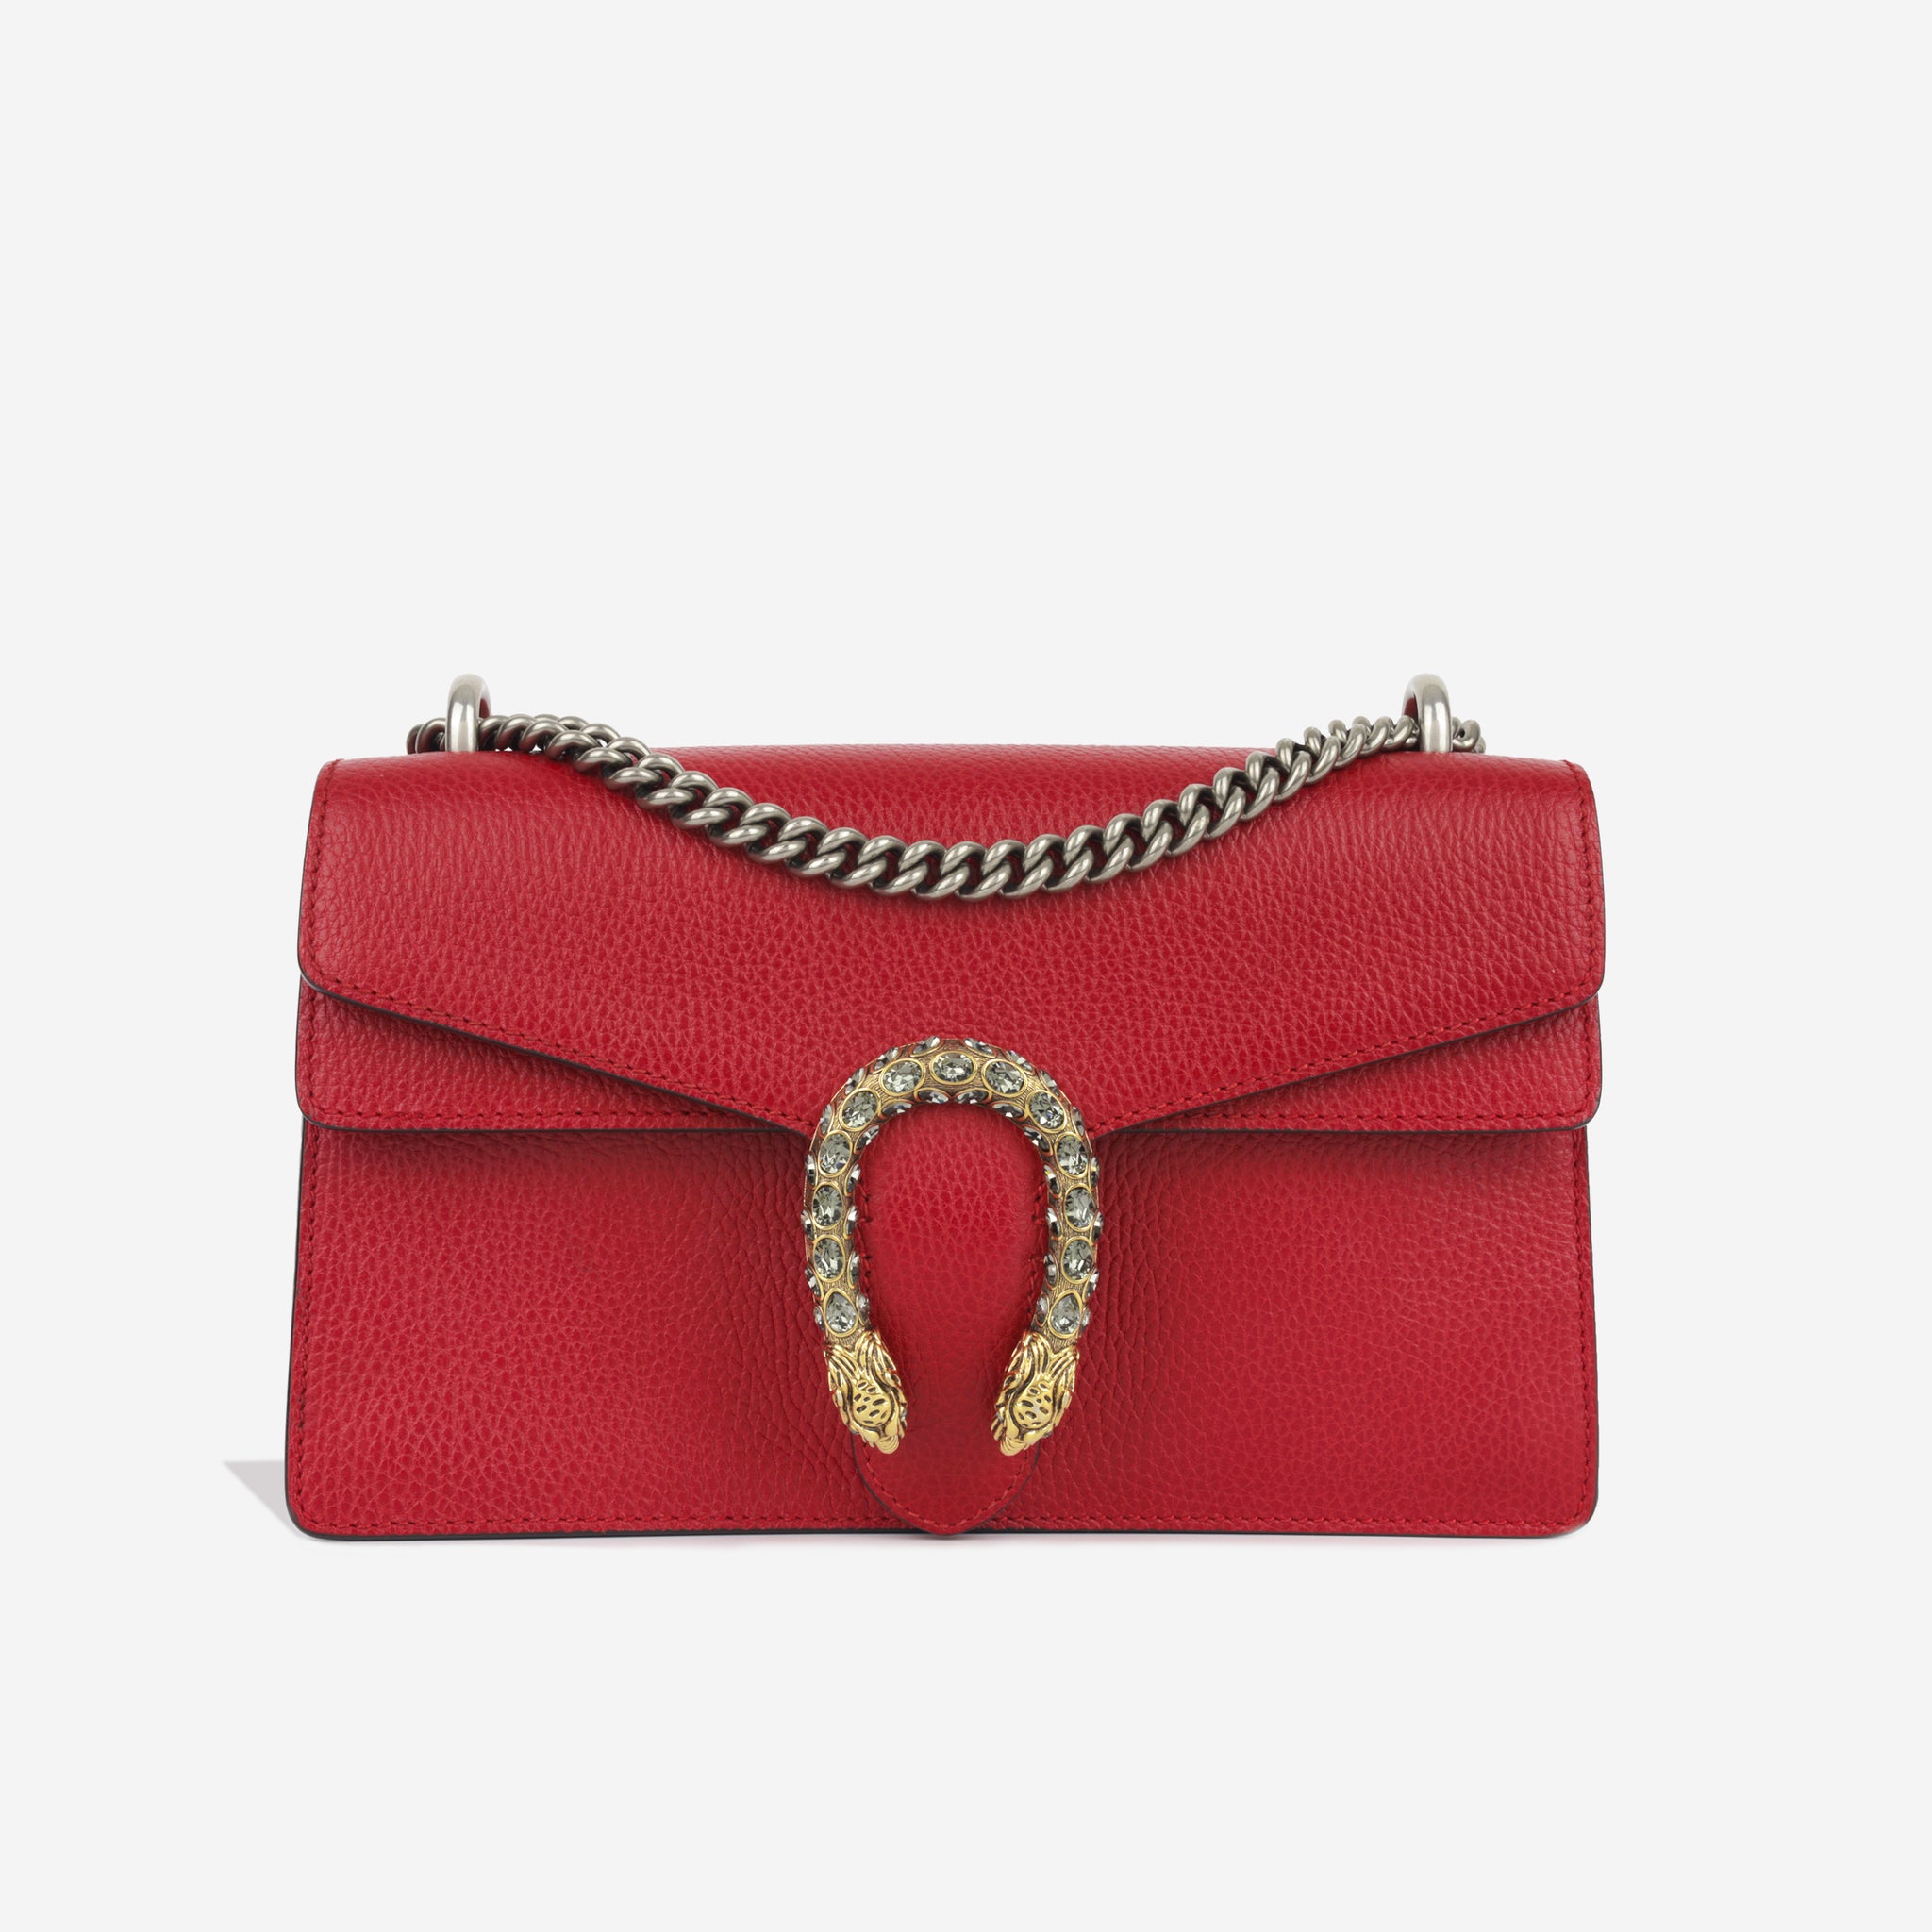 Gg marmont leather crossbody bag Gucci Red in Leather - 38552732